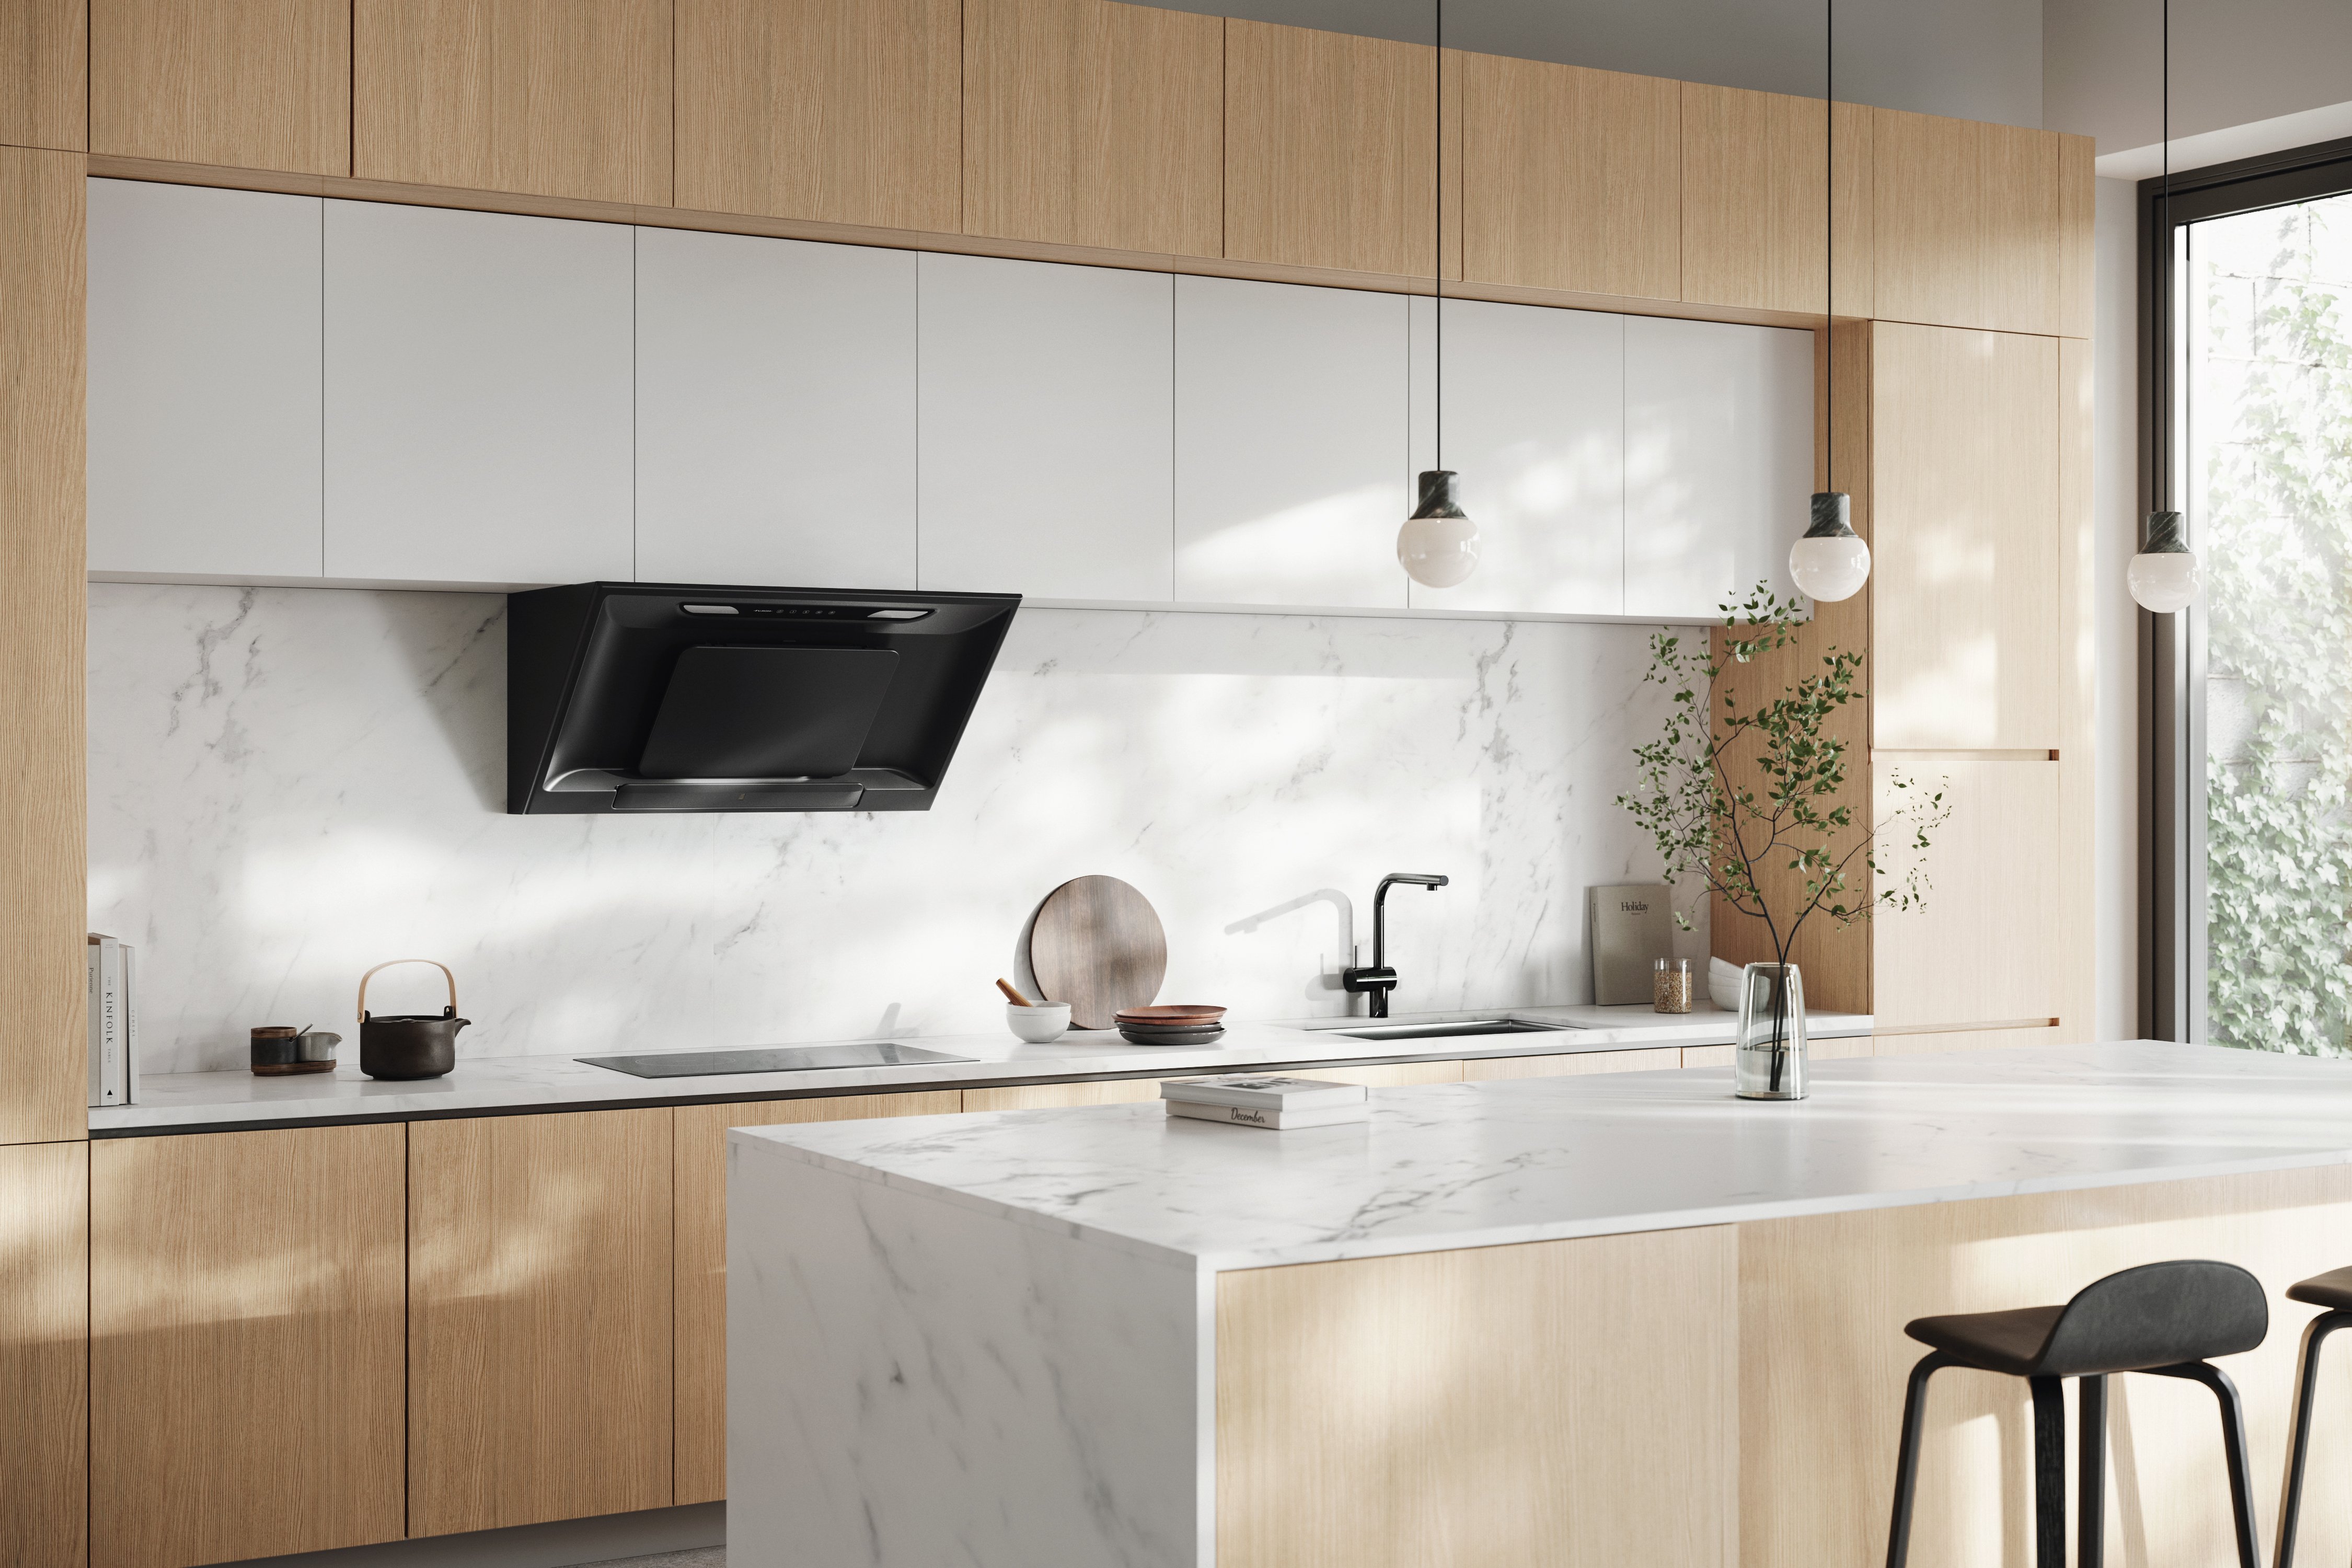 FUJIOH Cooker hoods- Blending style and function vol.3